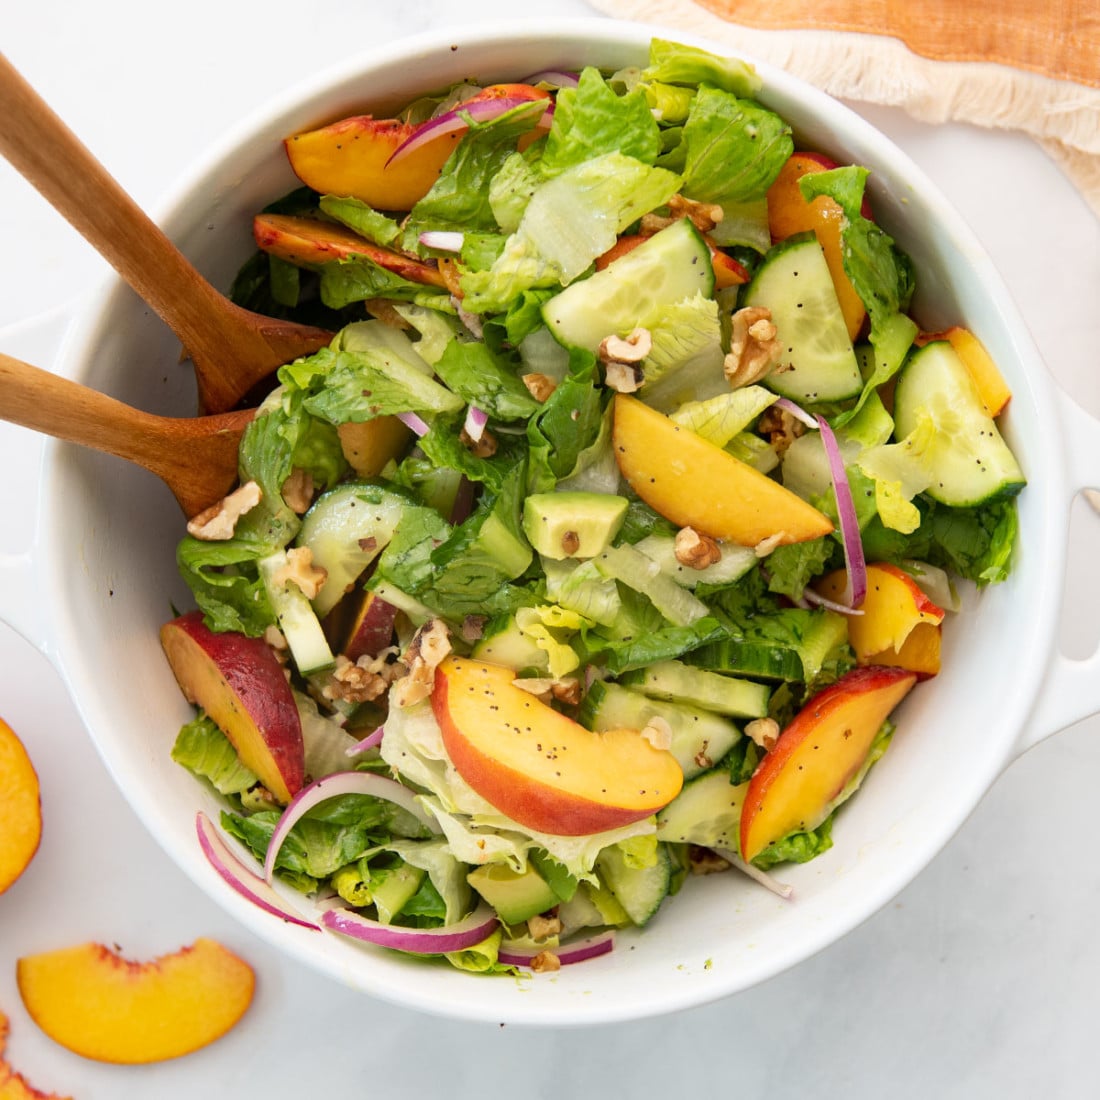 salad with romaine, peaches, red onion, cucumbers, walnuts, and avocado in salad bowl